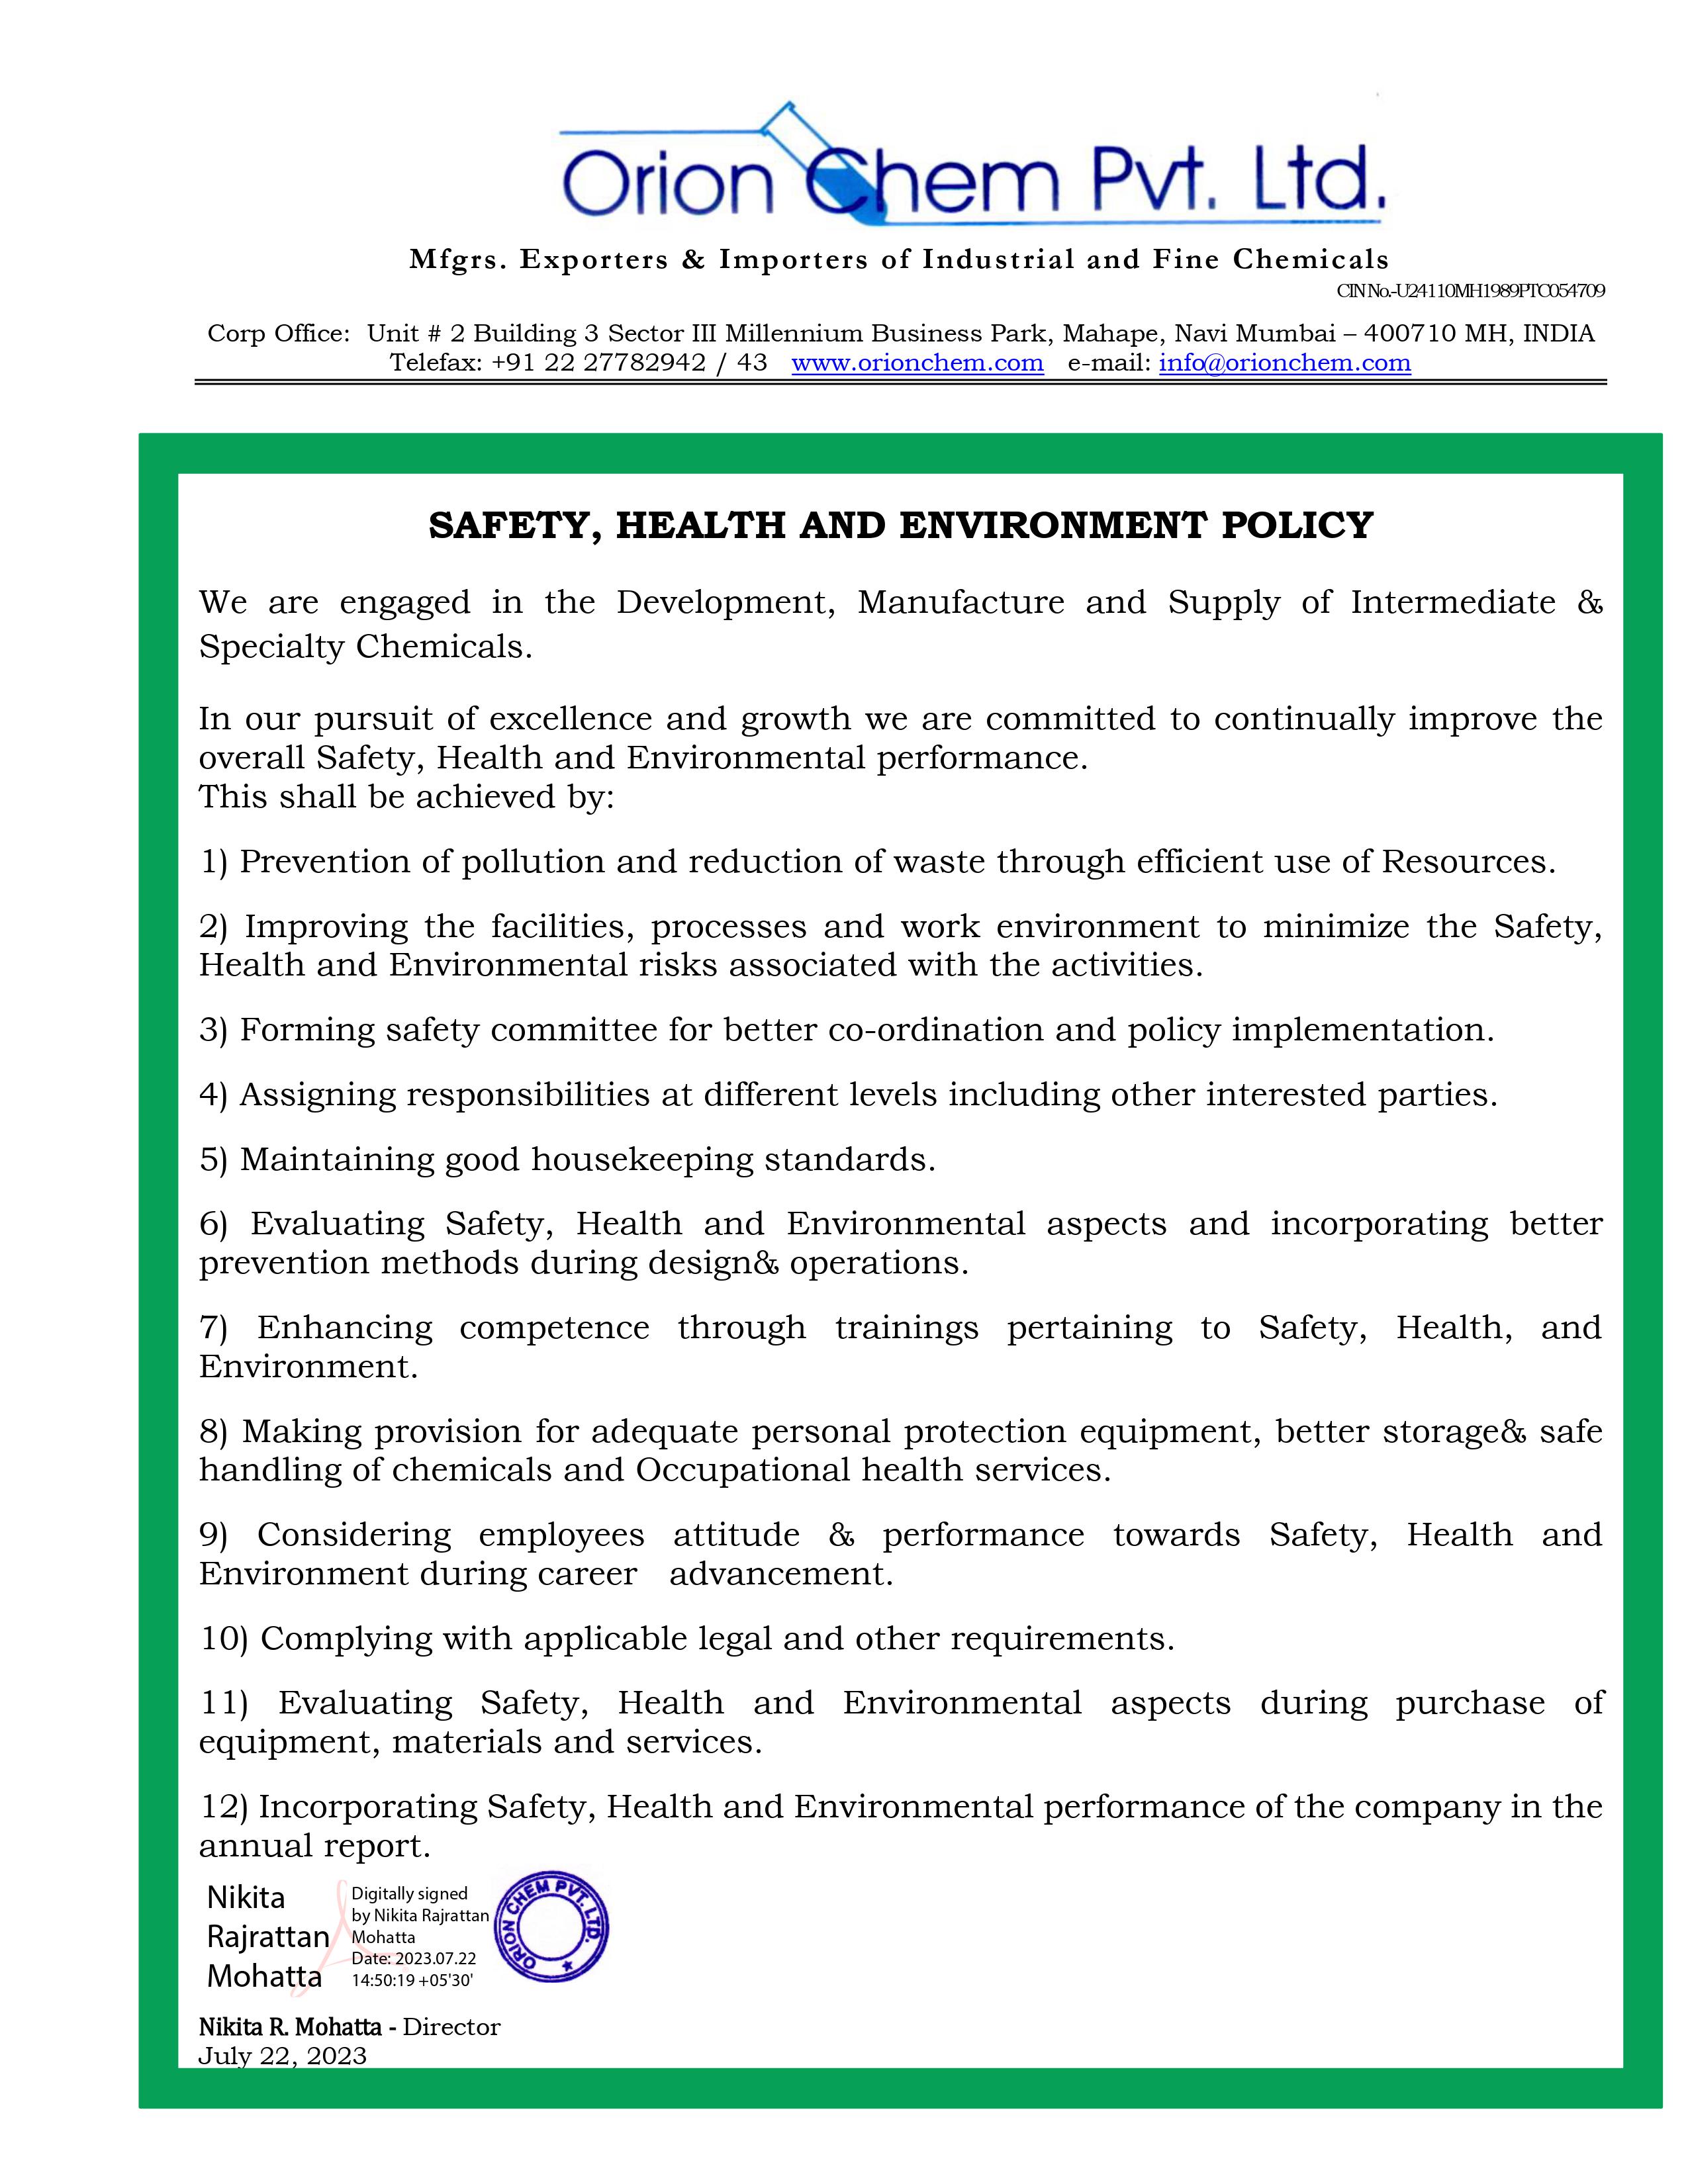 Environment Protection, Health and Safety Policy